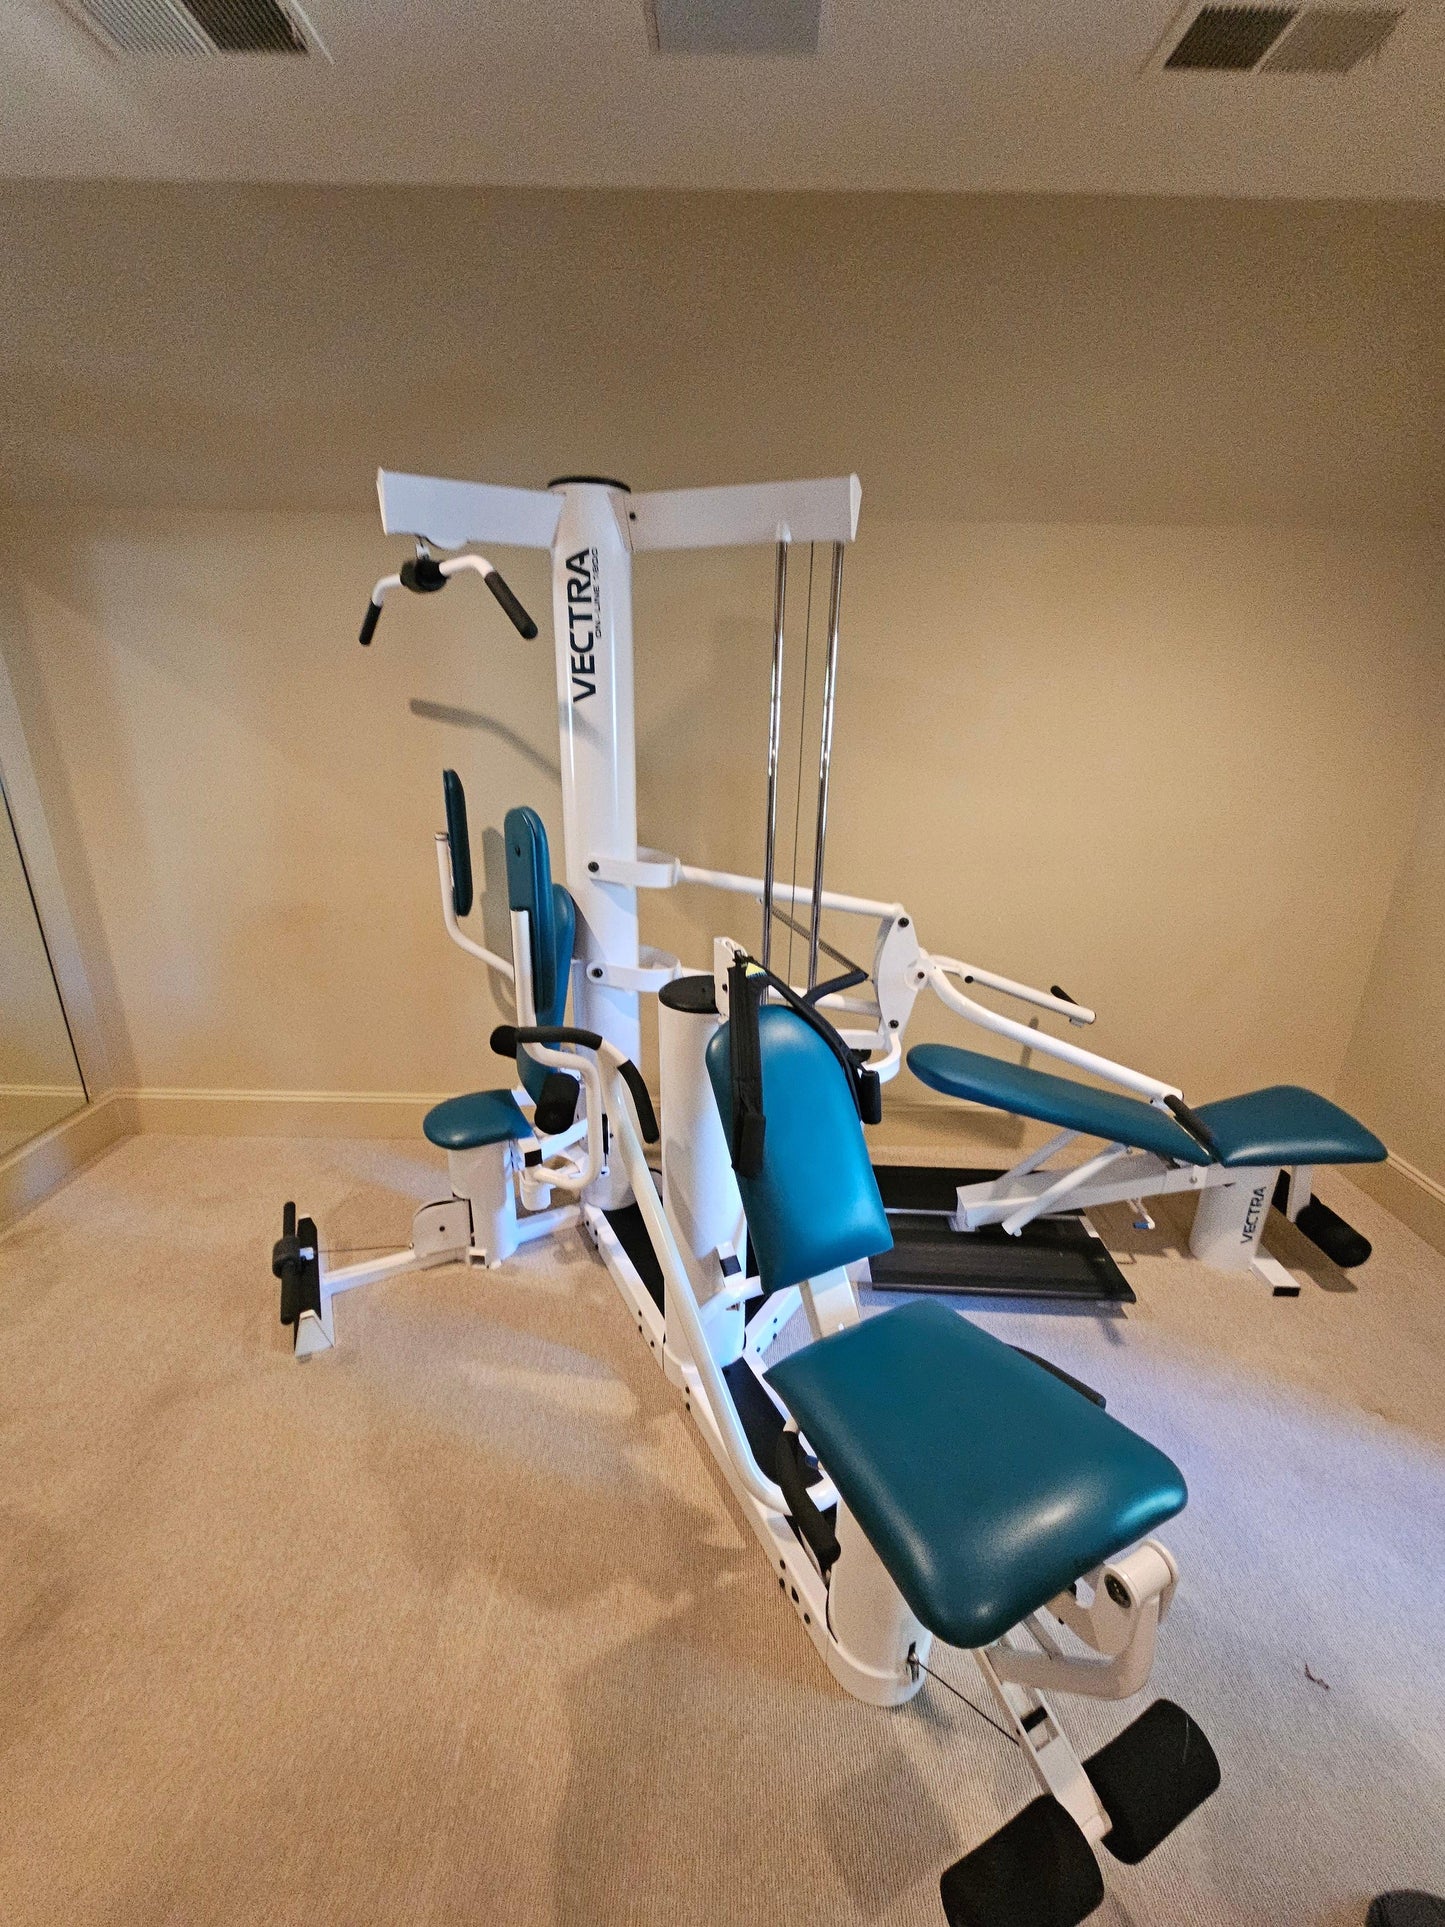 Pre-Owned Vectra On-Line 1800 Strength Training Gym - ExerciseUnlimited